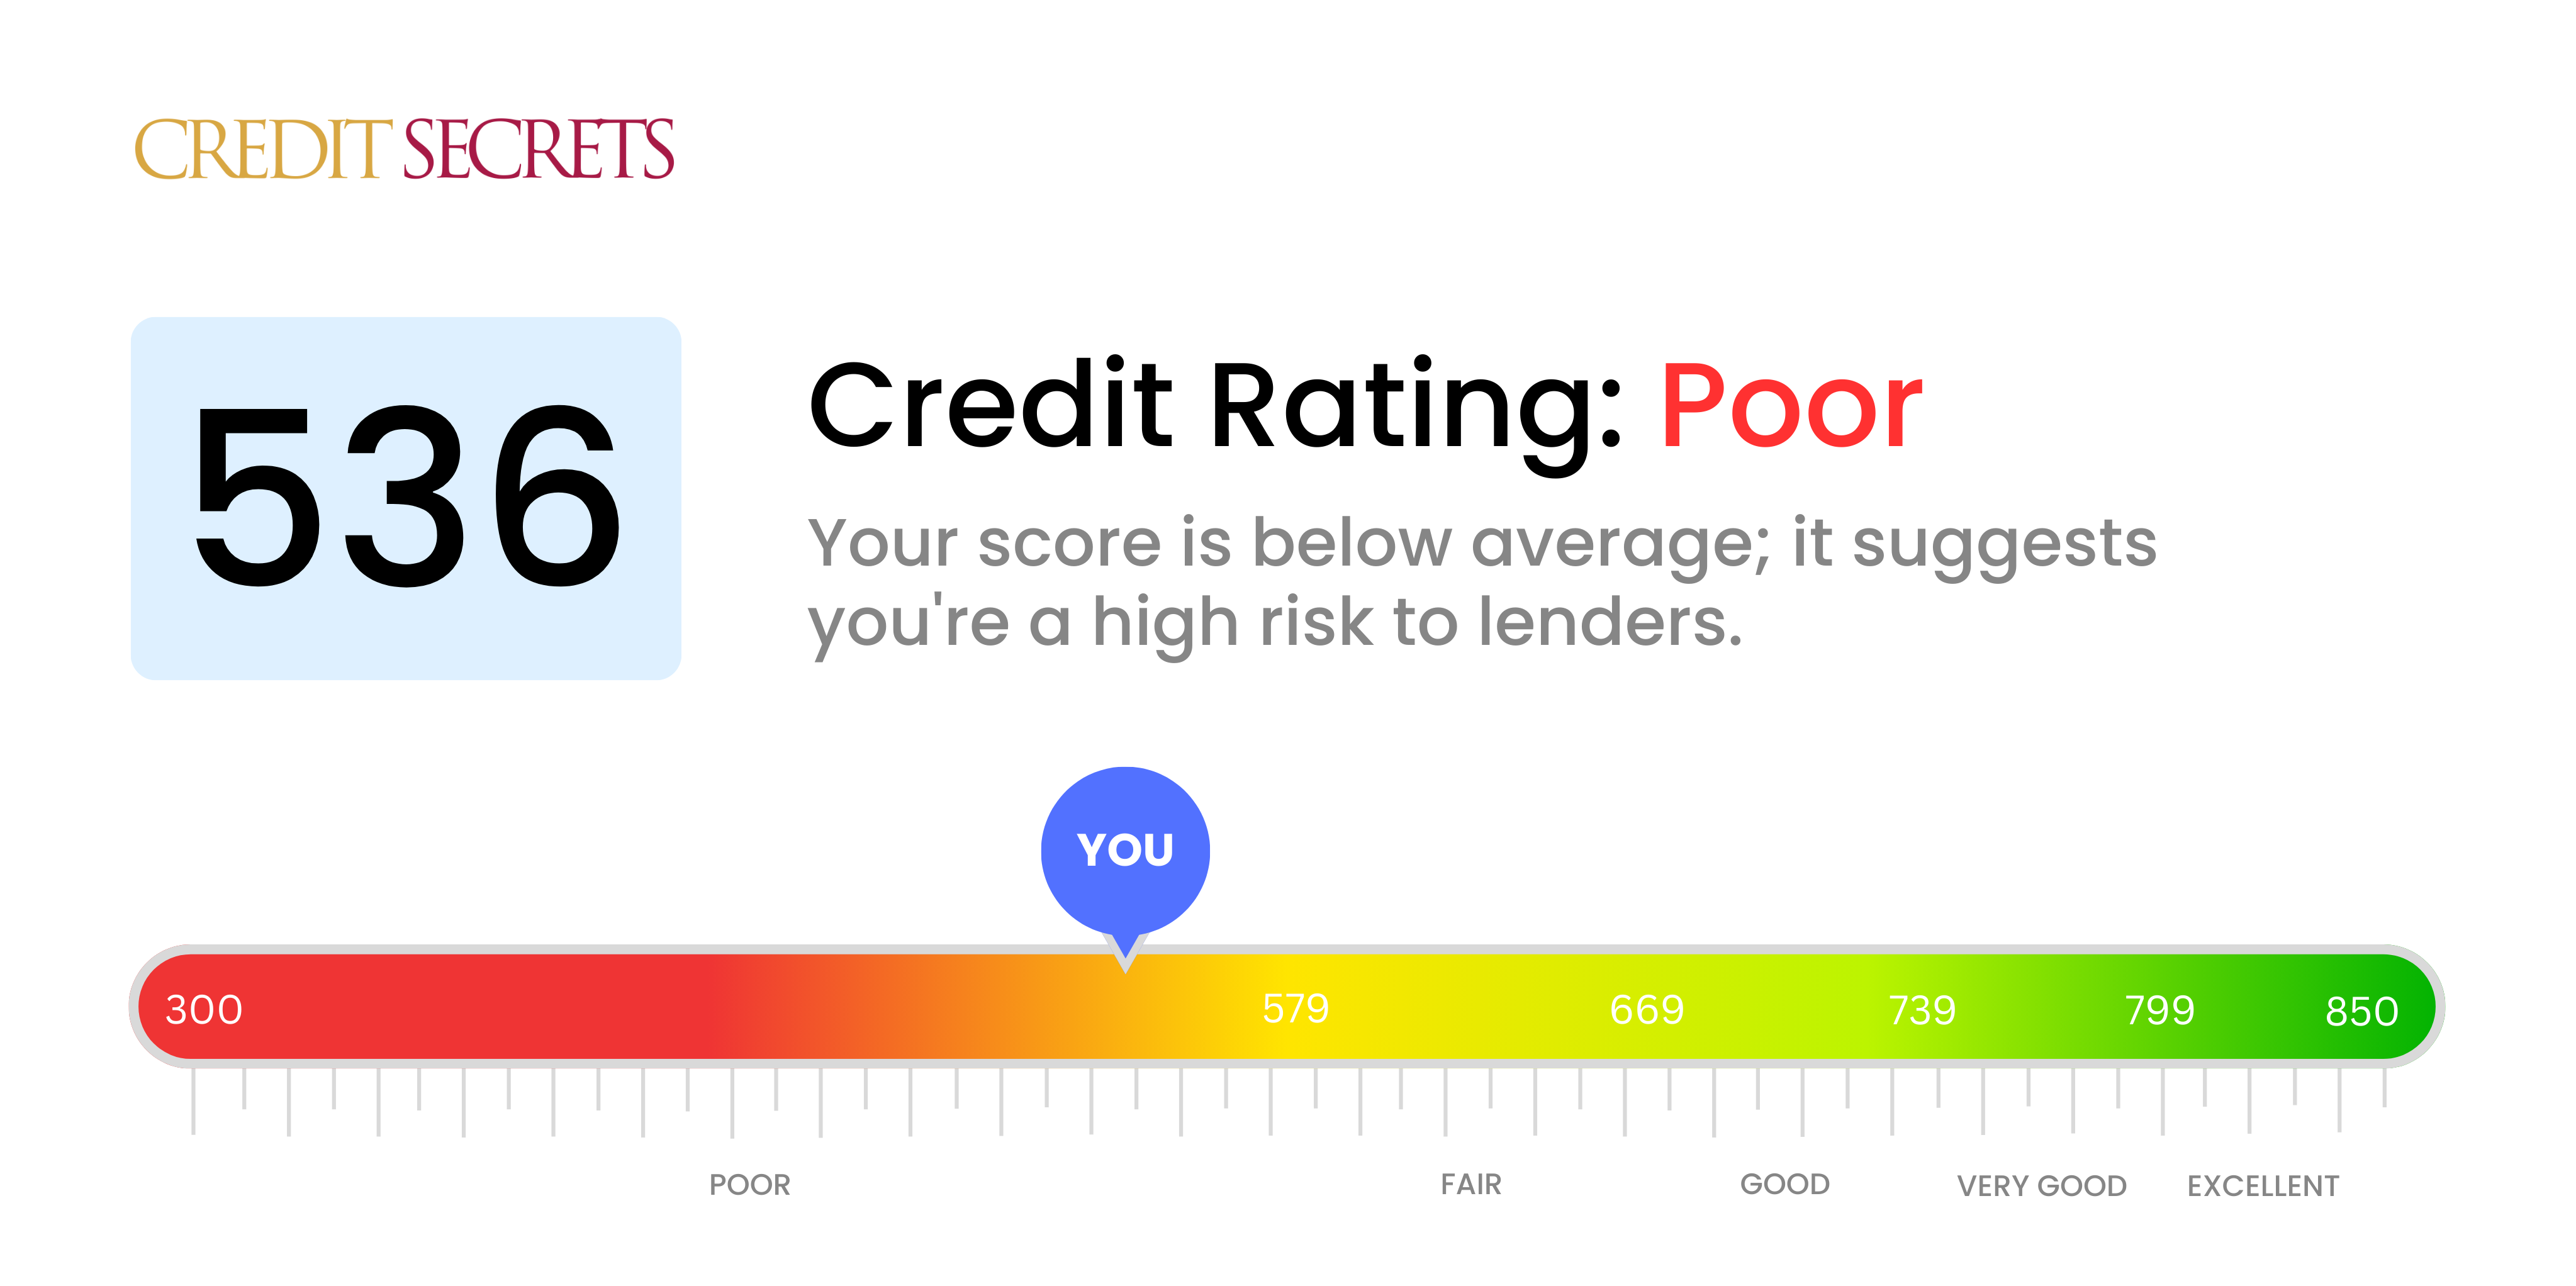 Is 536 a good credit score?